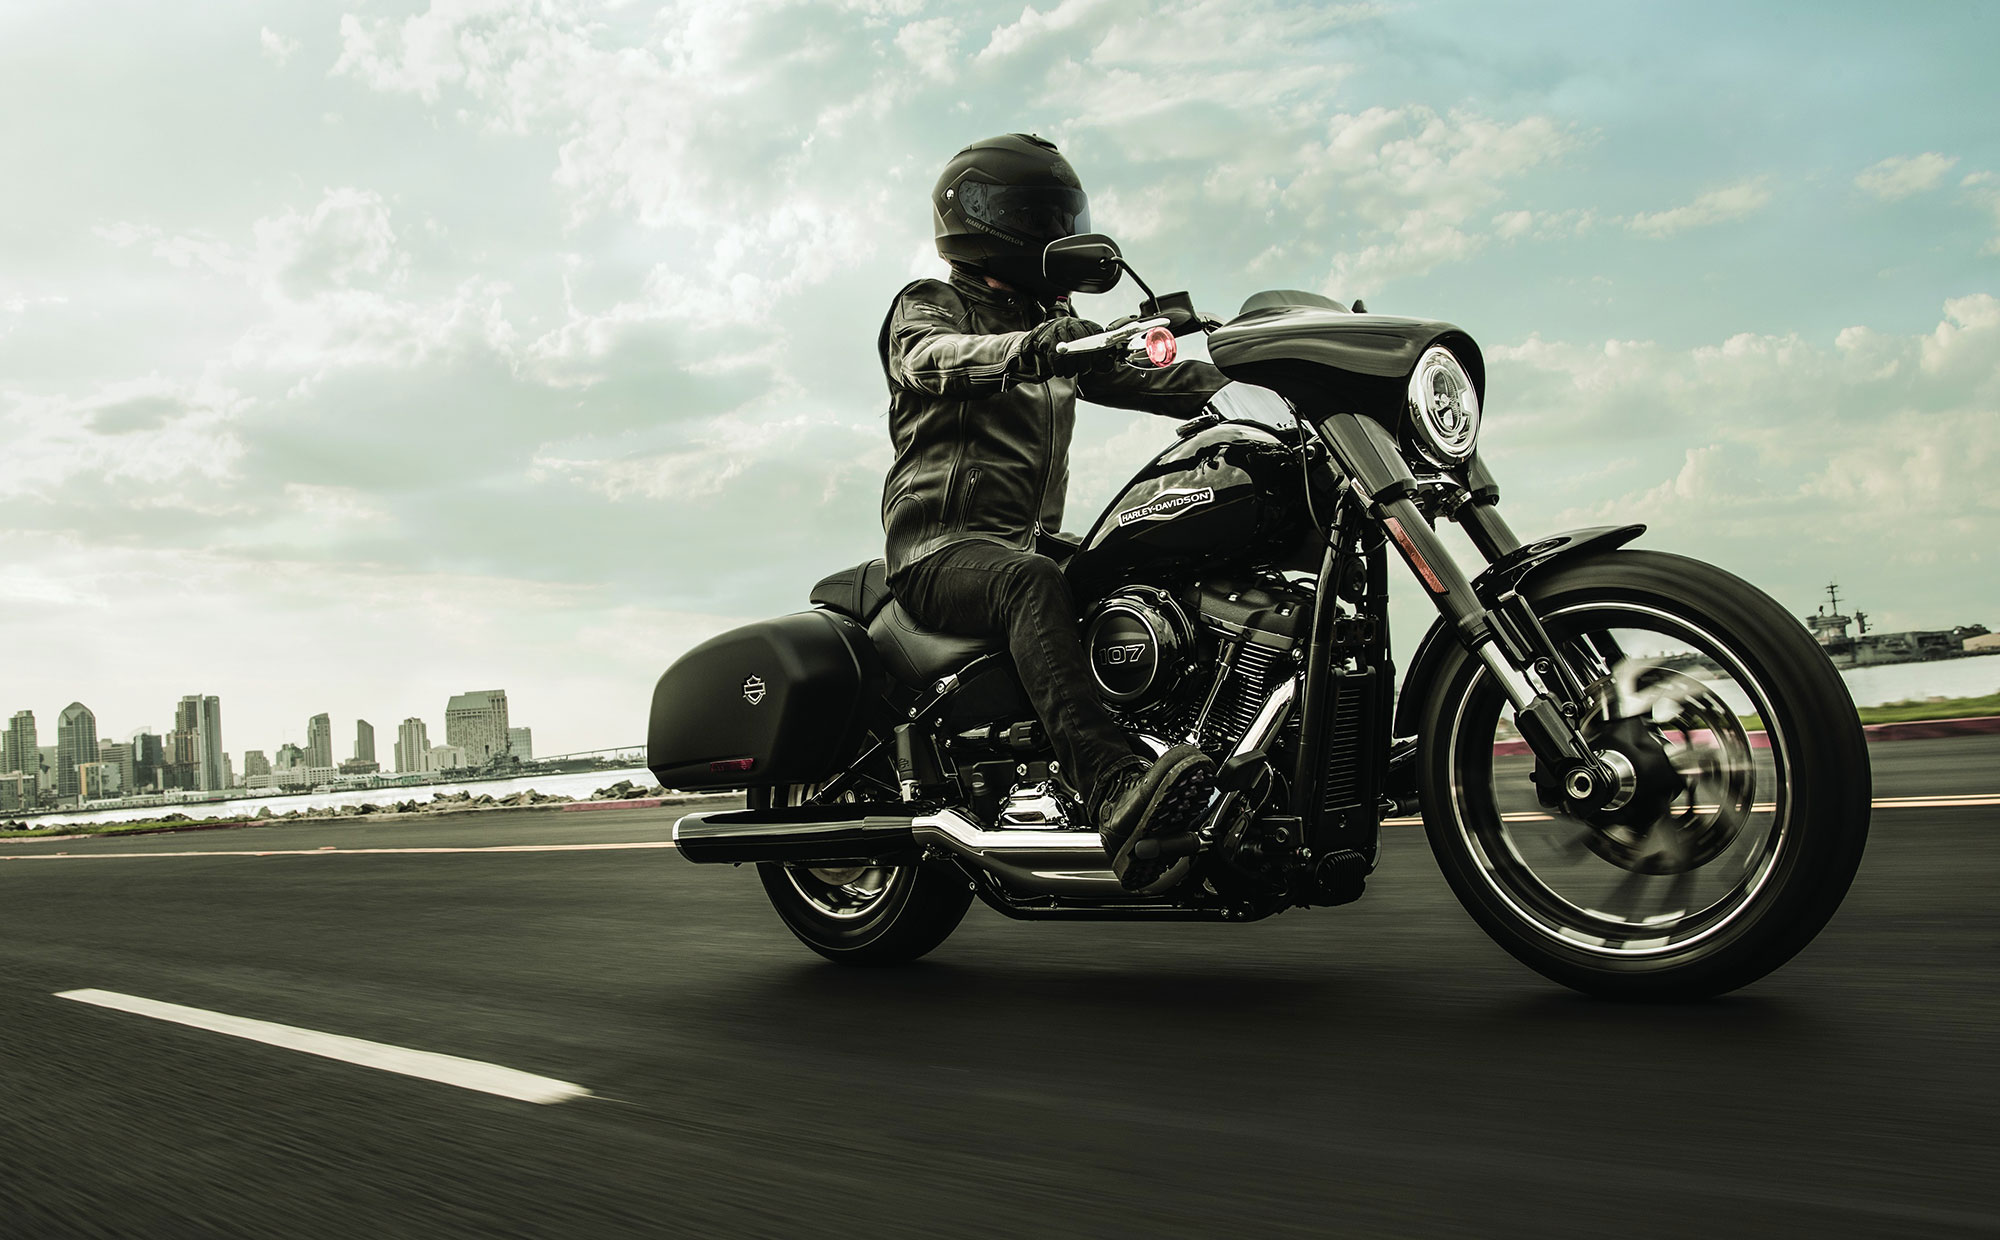 Harley-Davidson tries to regain its coolness factor